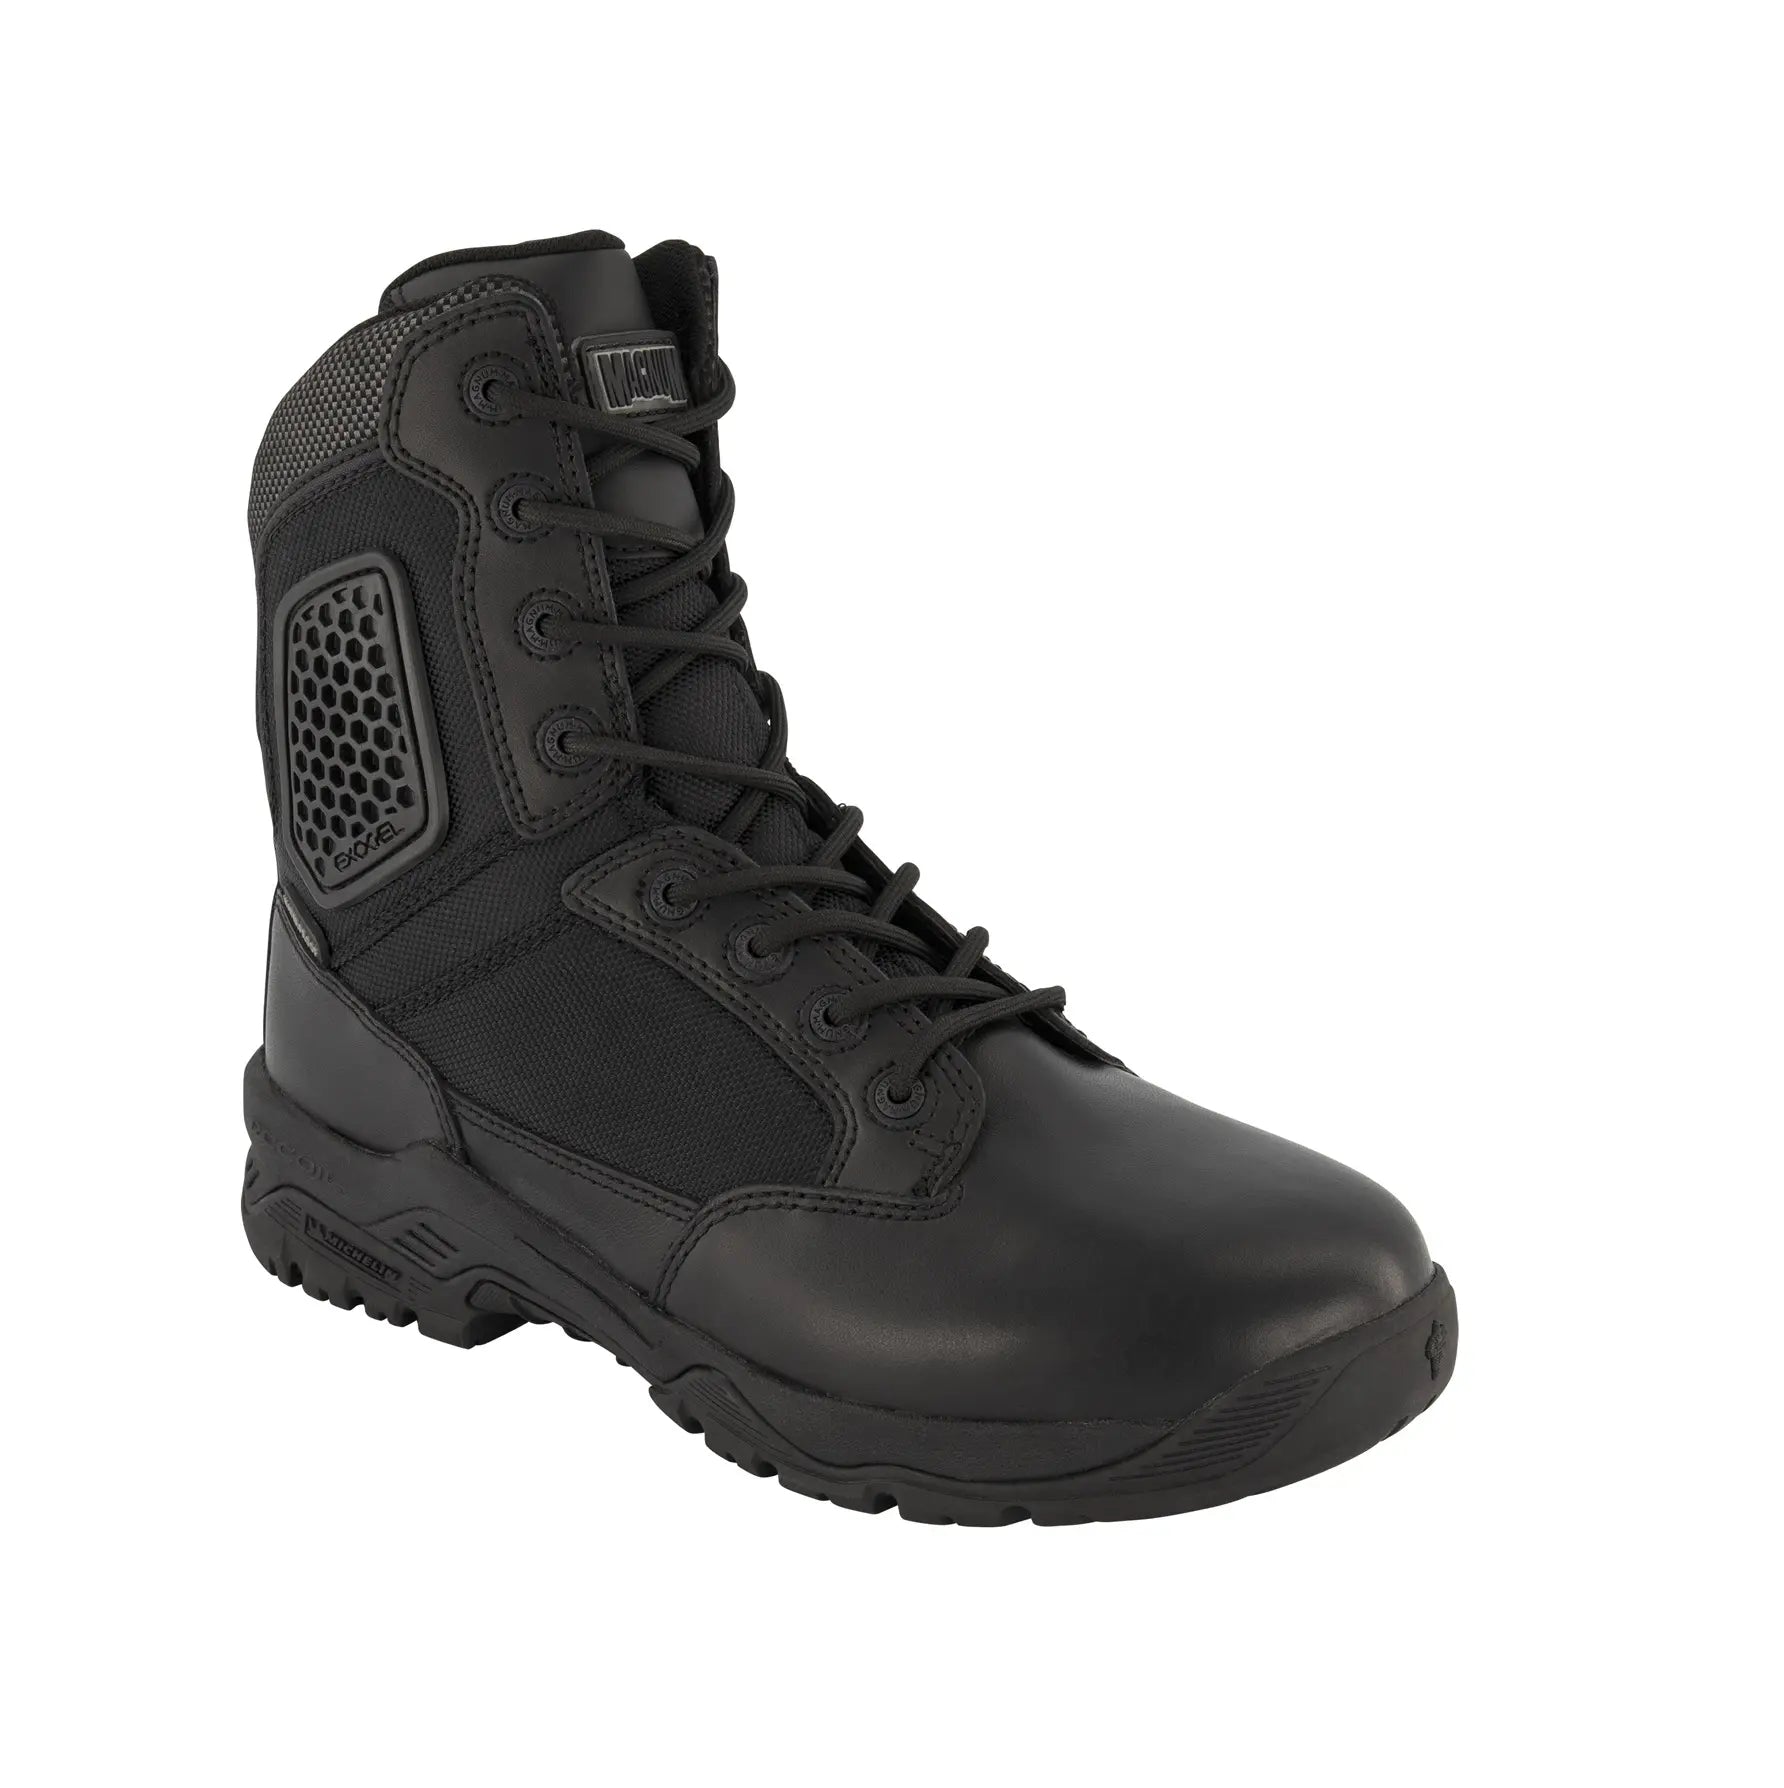 Magnum MSF900 Strike Force 8.0 SZ CT Safety Boots -Black